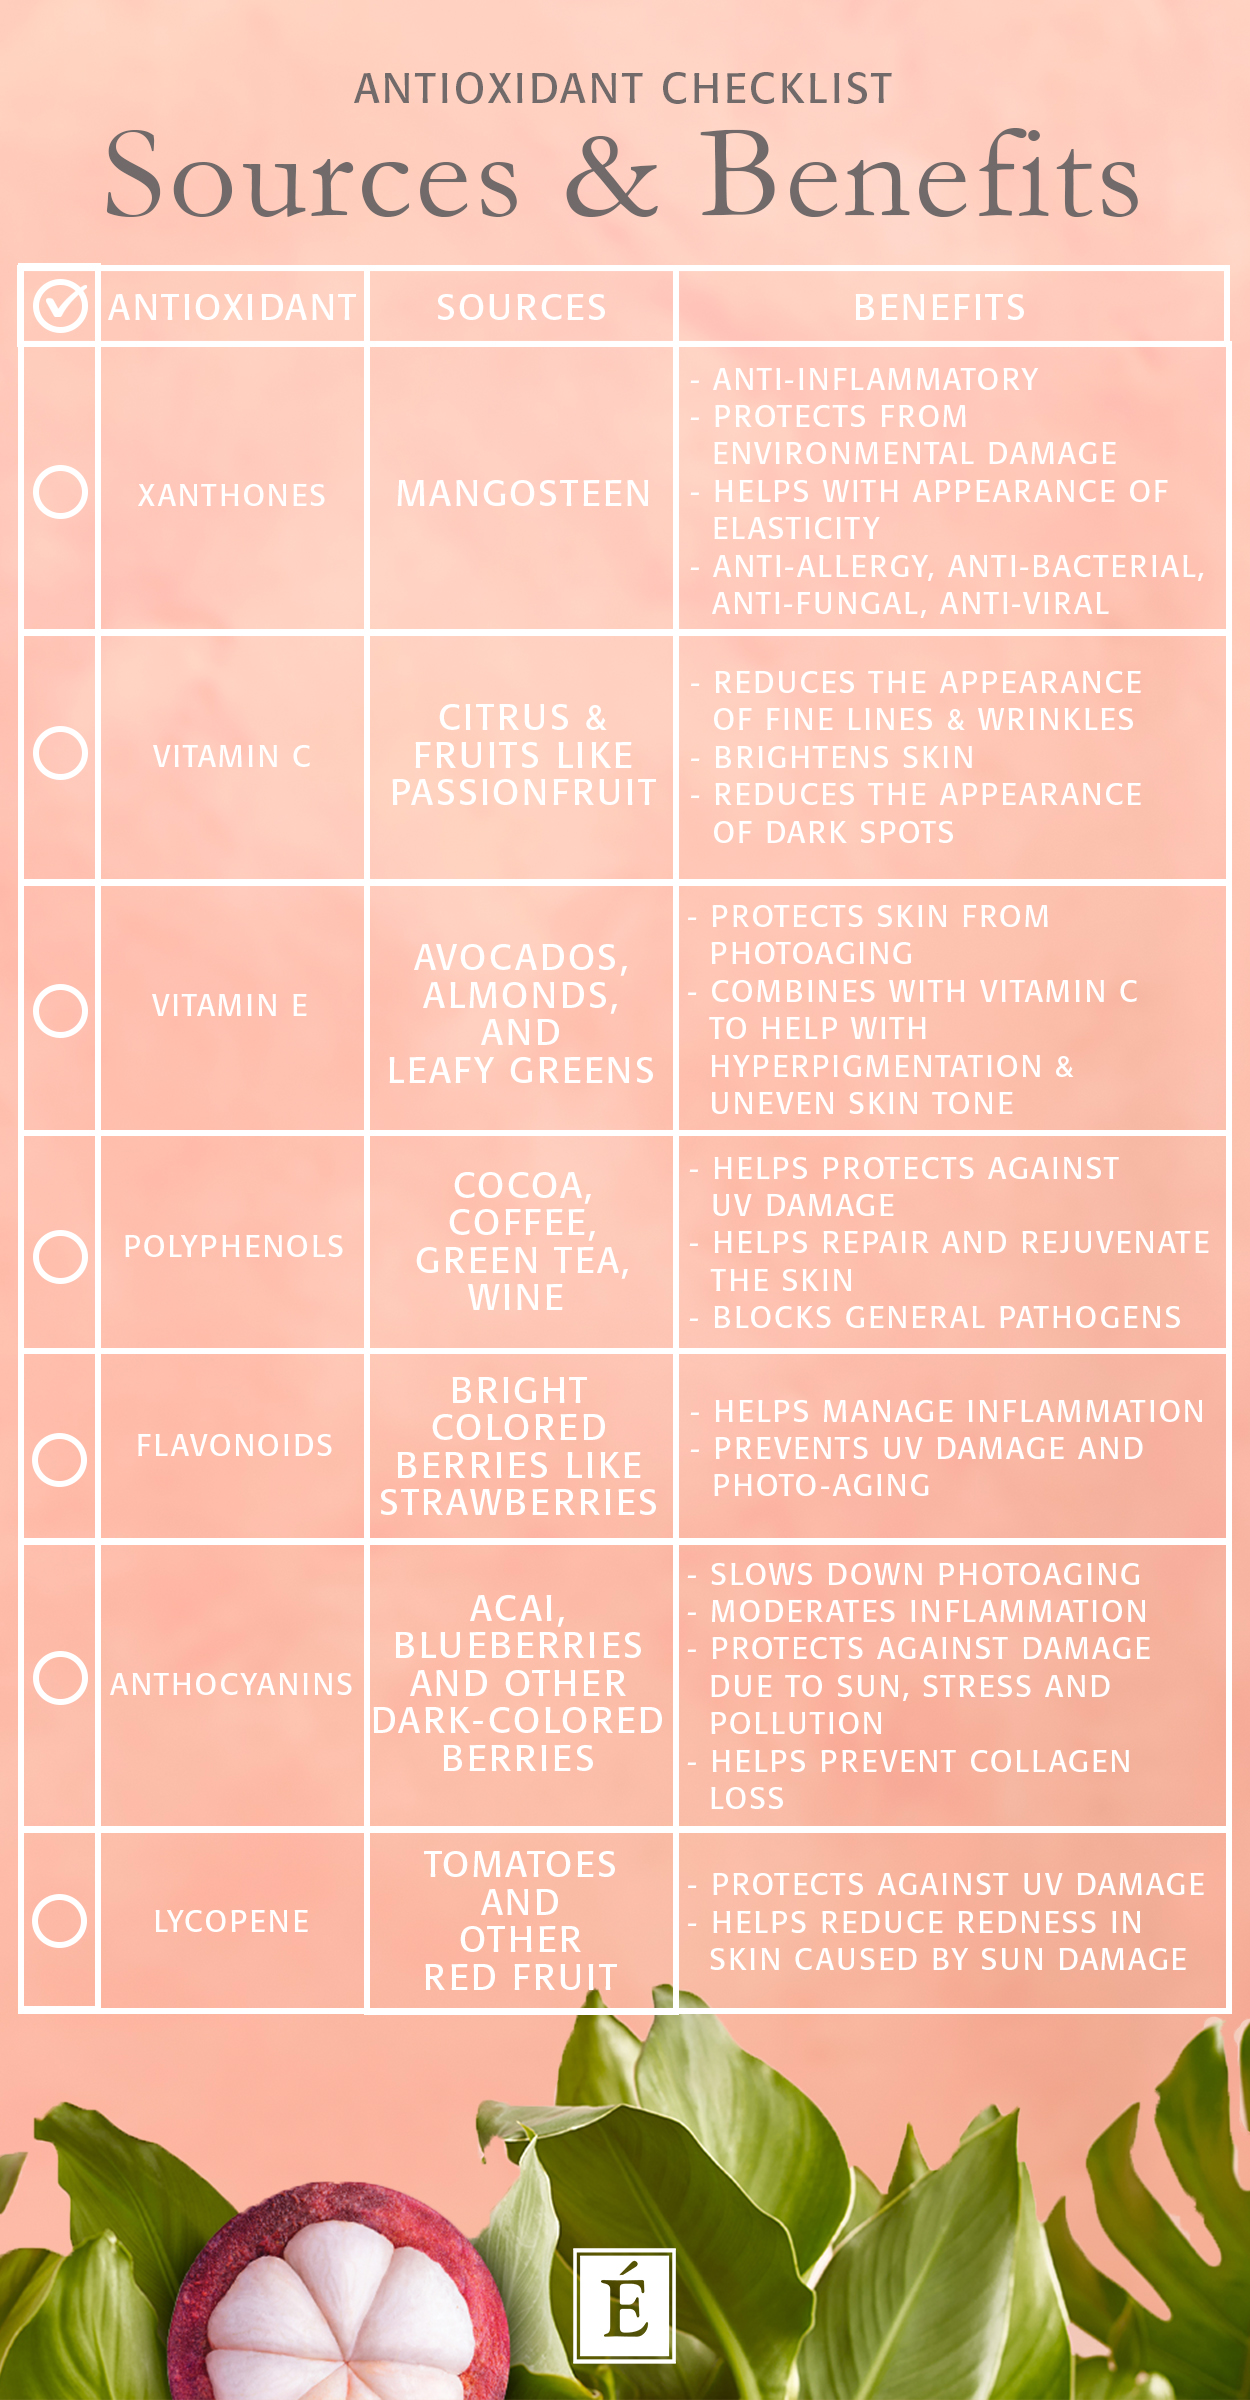 Antioxidant sources and benefits infographic